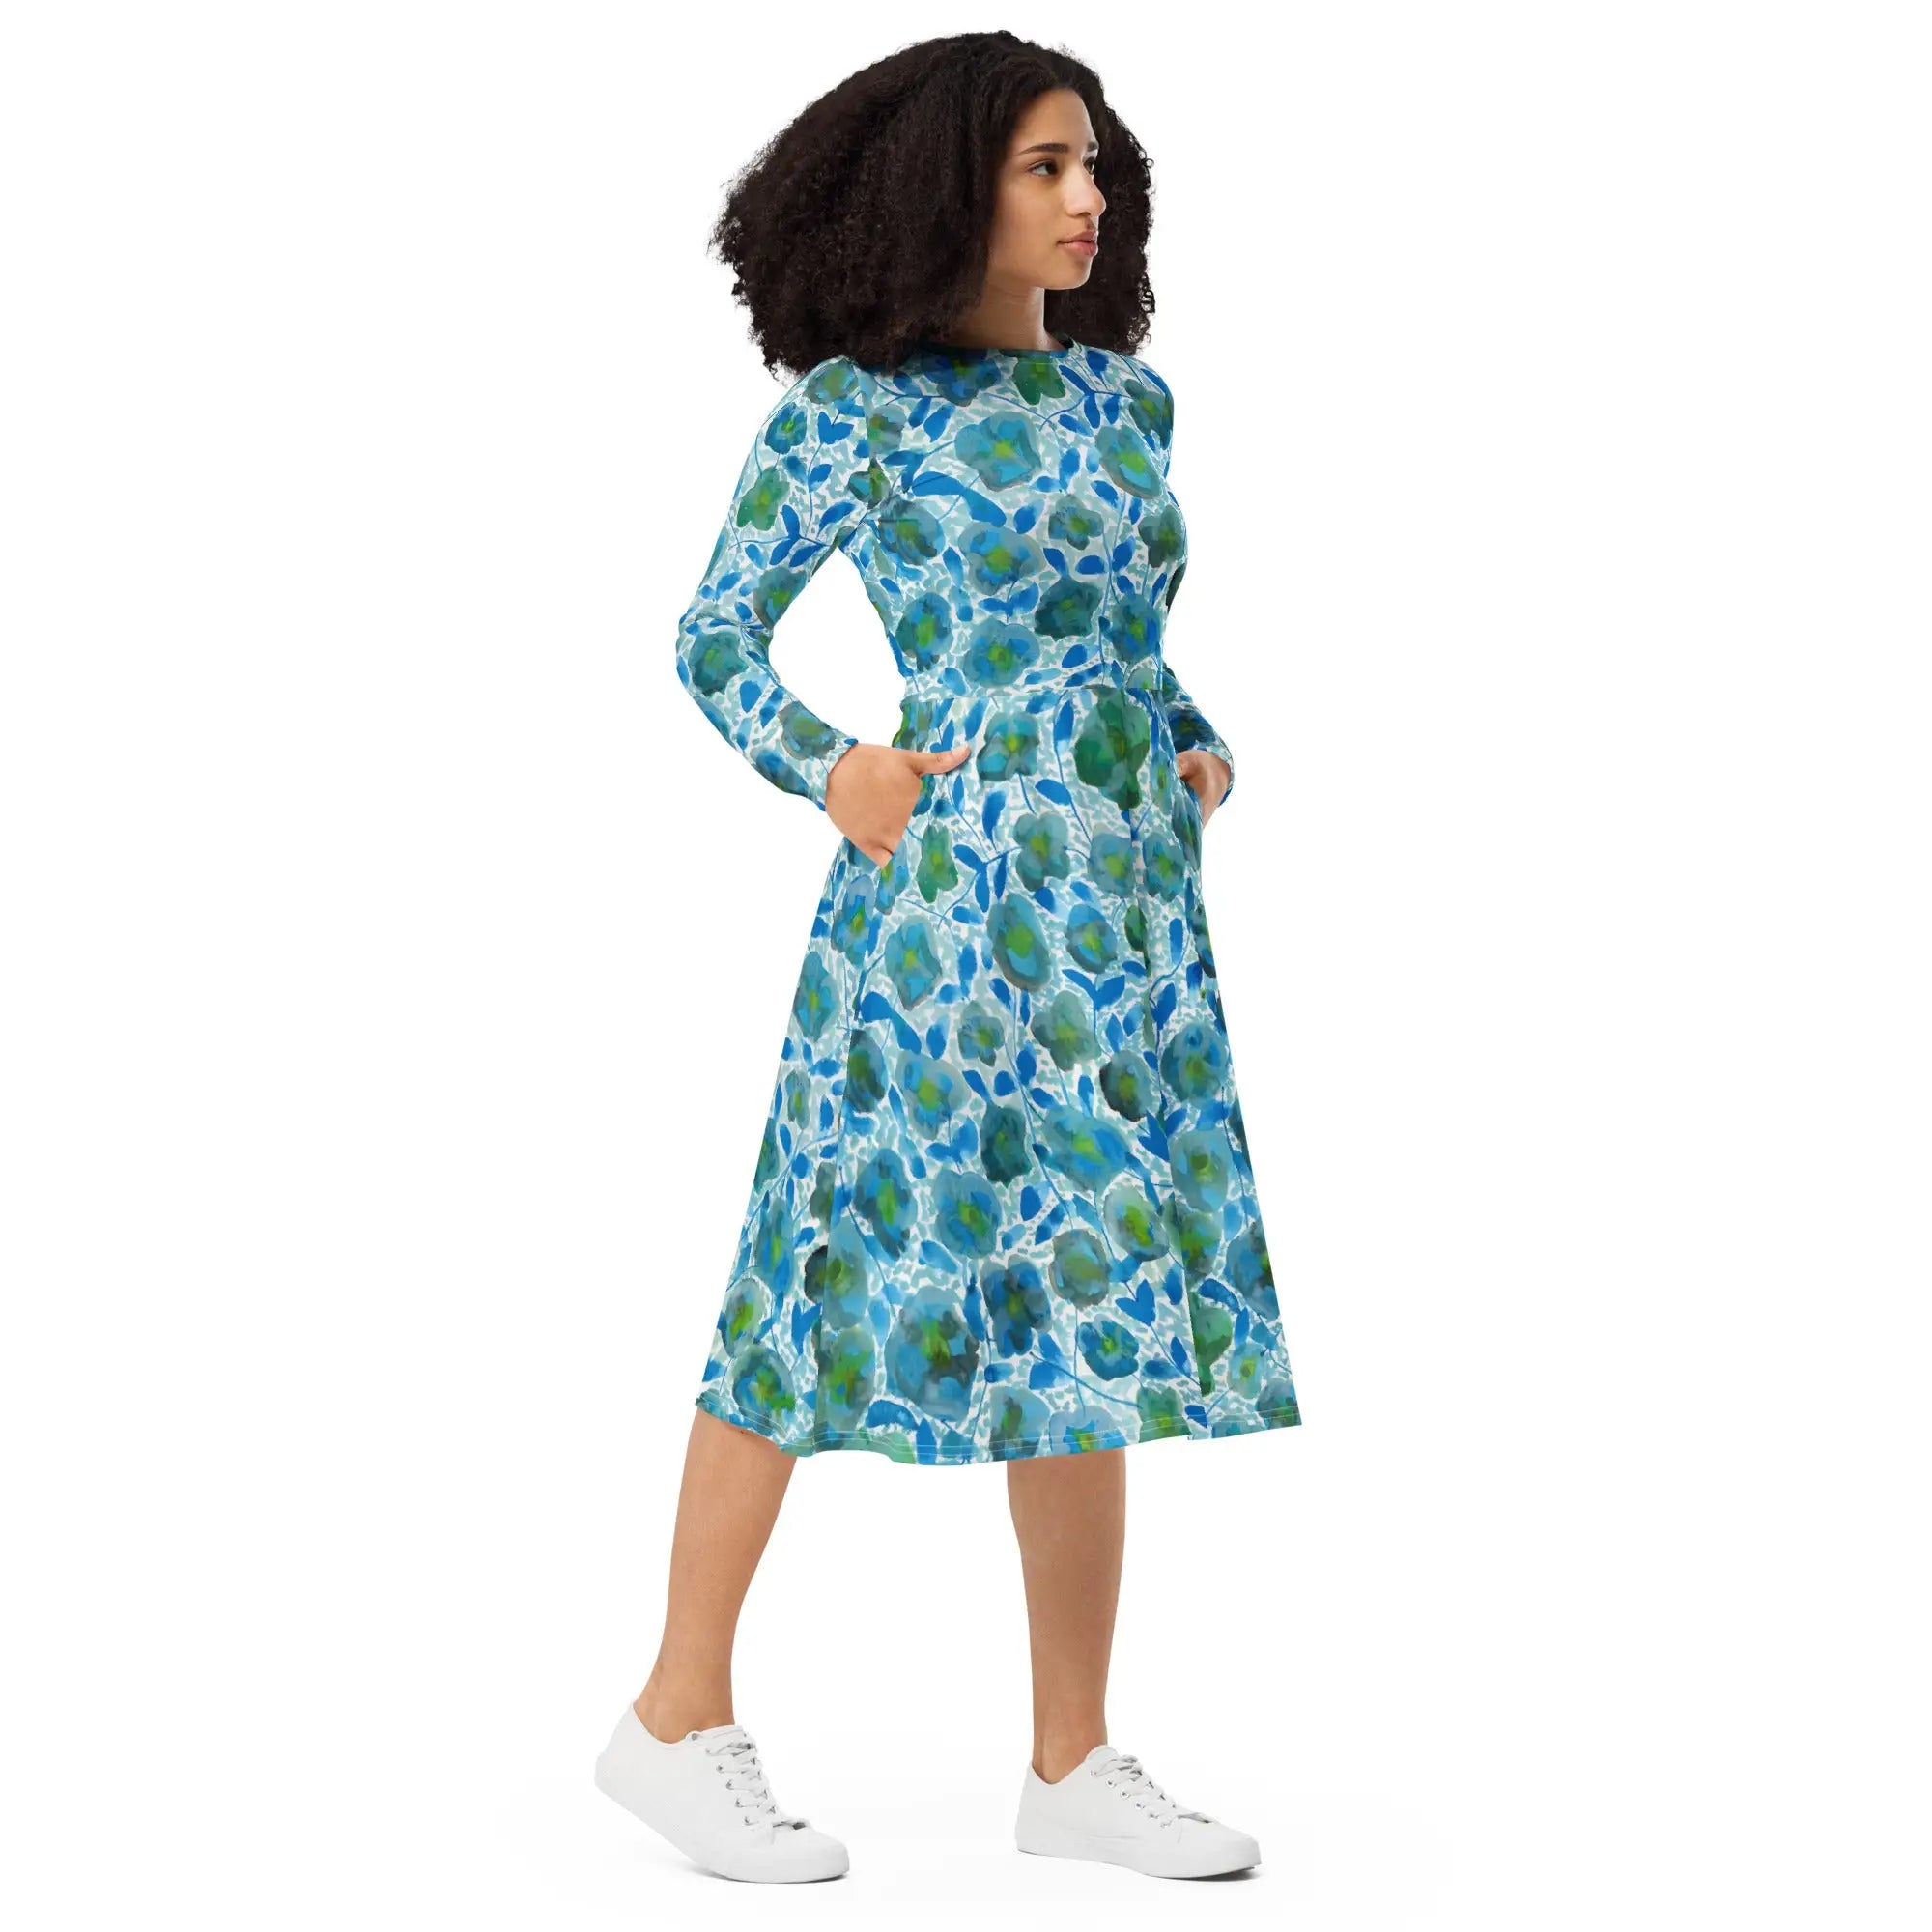 Woman in blue and green long sleeve midi dress with floral pattern